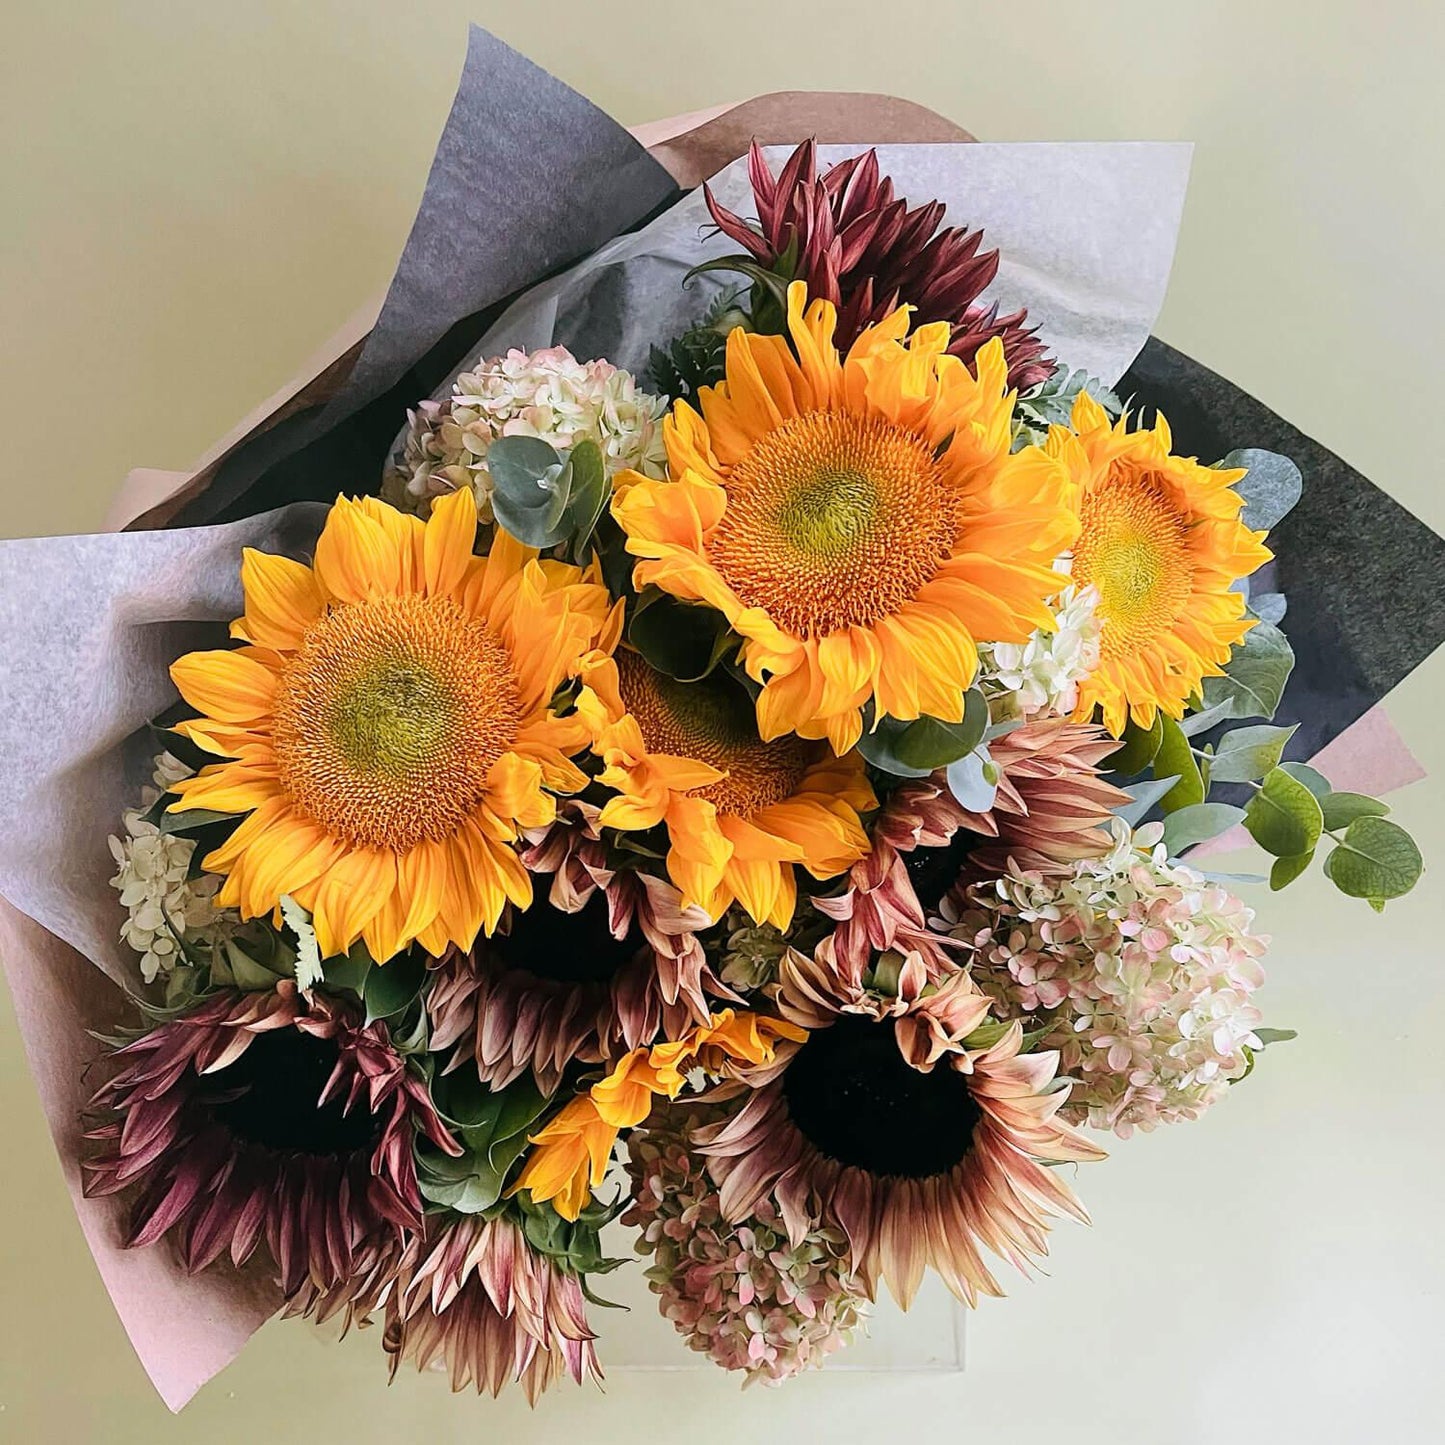 Wonderblooms monthly flower subscription from Quince Flowers, Toronto Florist and flower delivery - sunflowers in dark purple and bright gold. Order online for flower & plant subscriptions from the best florist in Toronto near you.